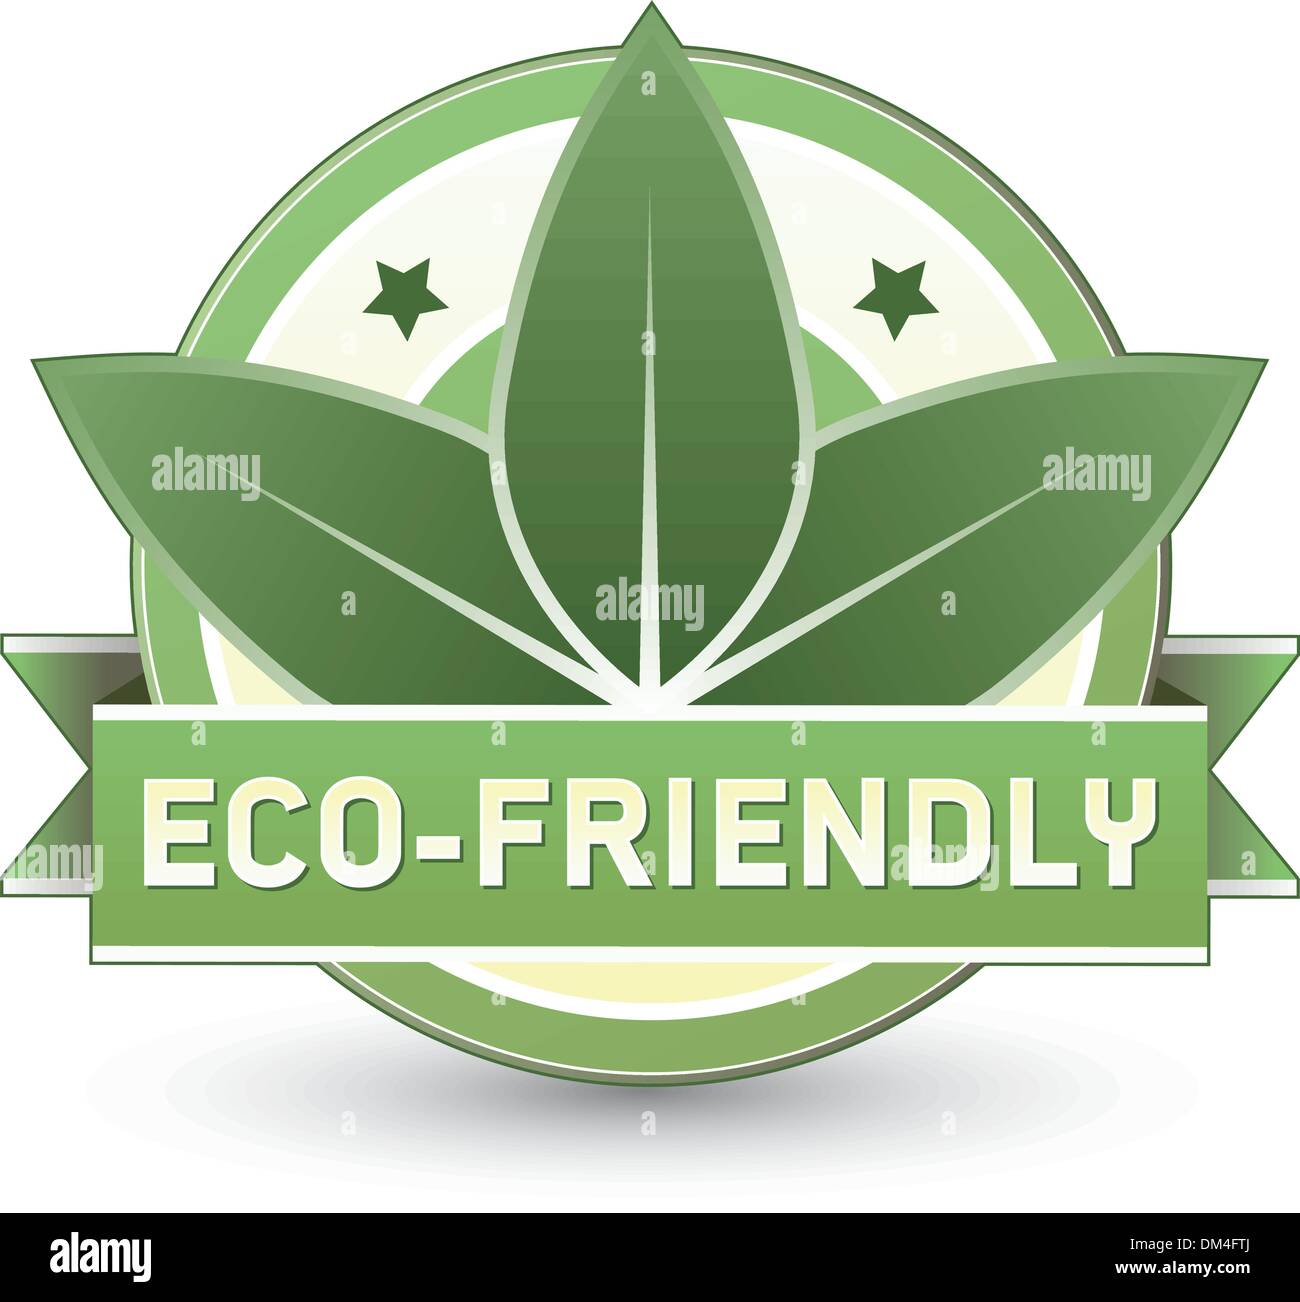 Eco-friendly product or food label Stock Vector